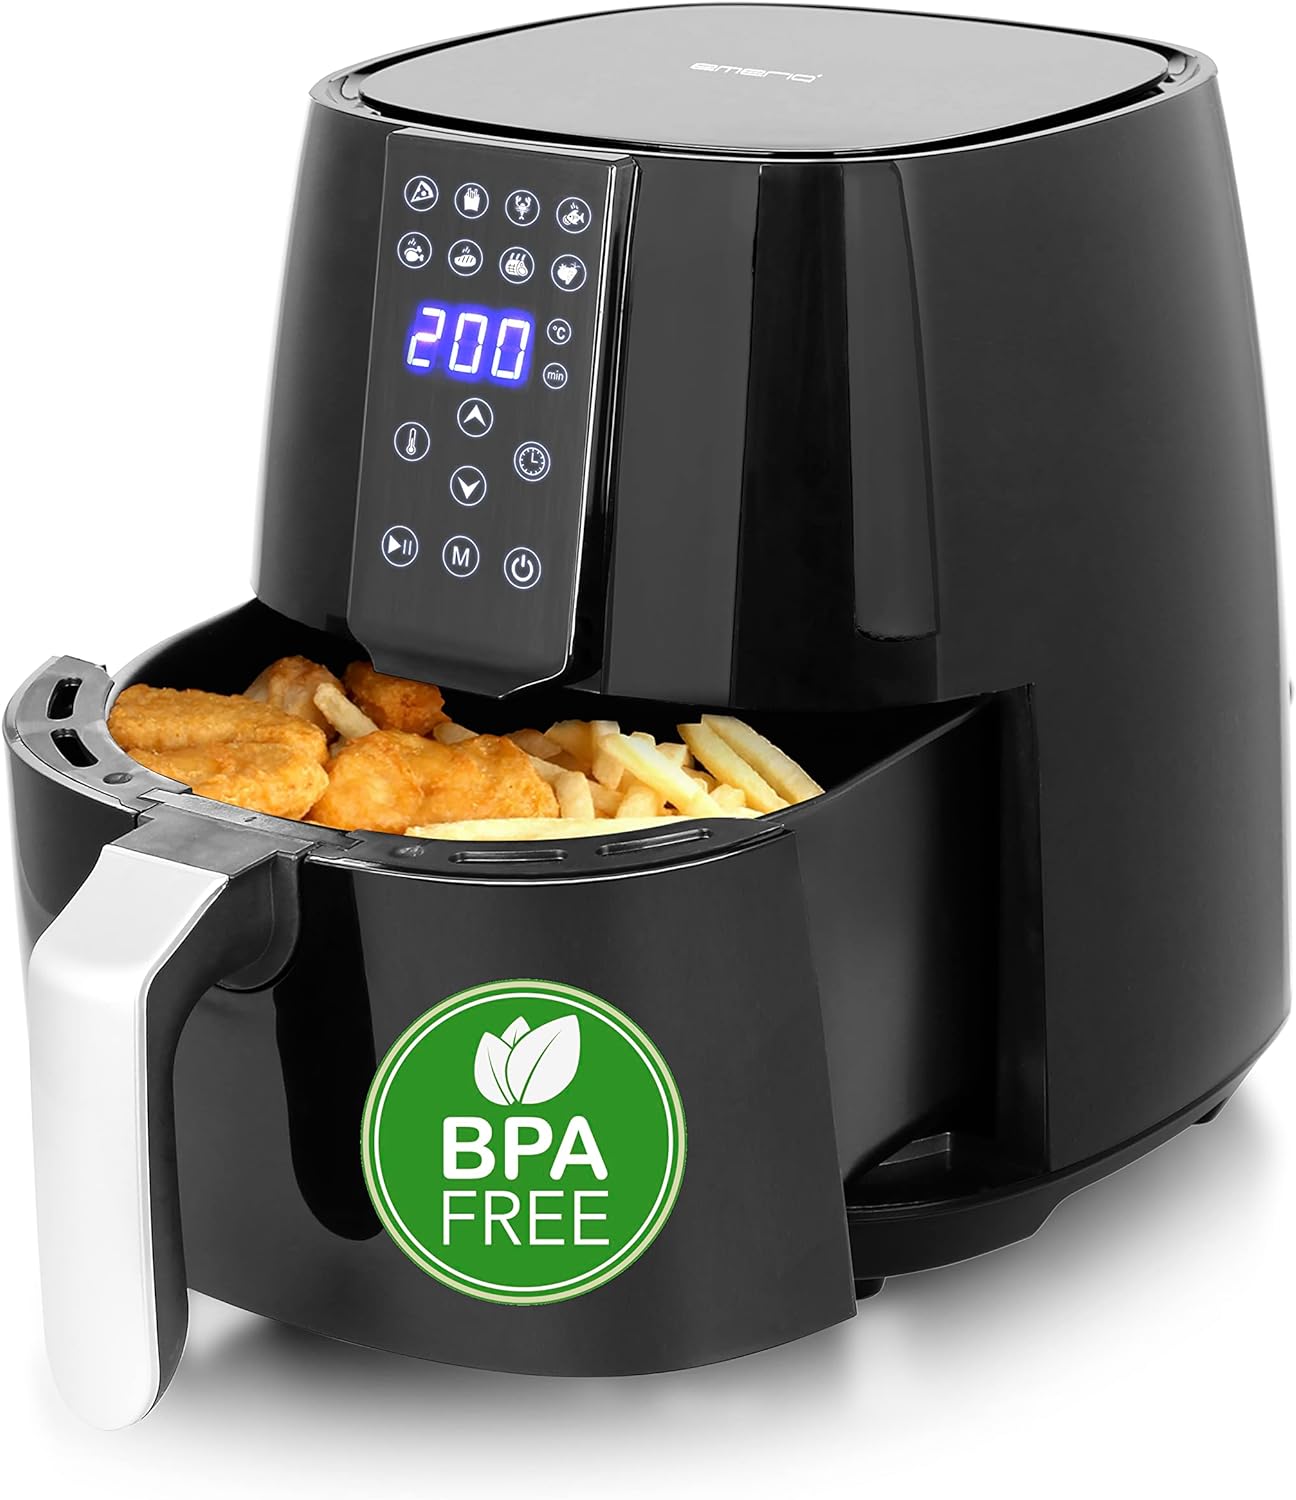 Emerio AF-126668 Digital SmartFryer, AirFryer, Hot Air Fryer, Frying with Hot Air without Additional Oil, XL, 3.8 Litre Volume, Cool Touch, BPA-Free, Fast Heating, 1450 Watt